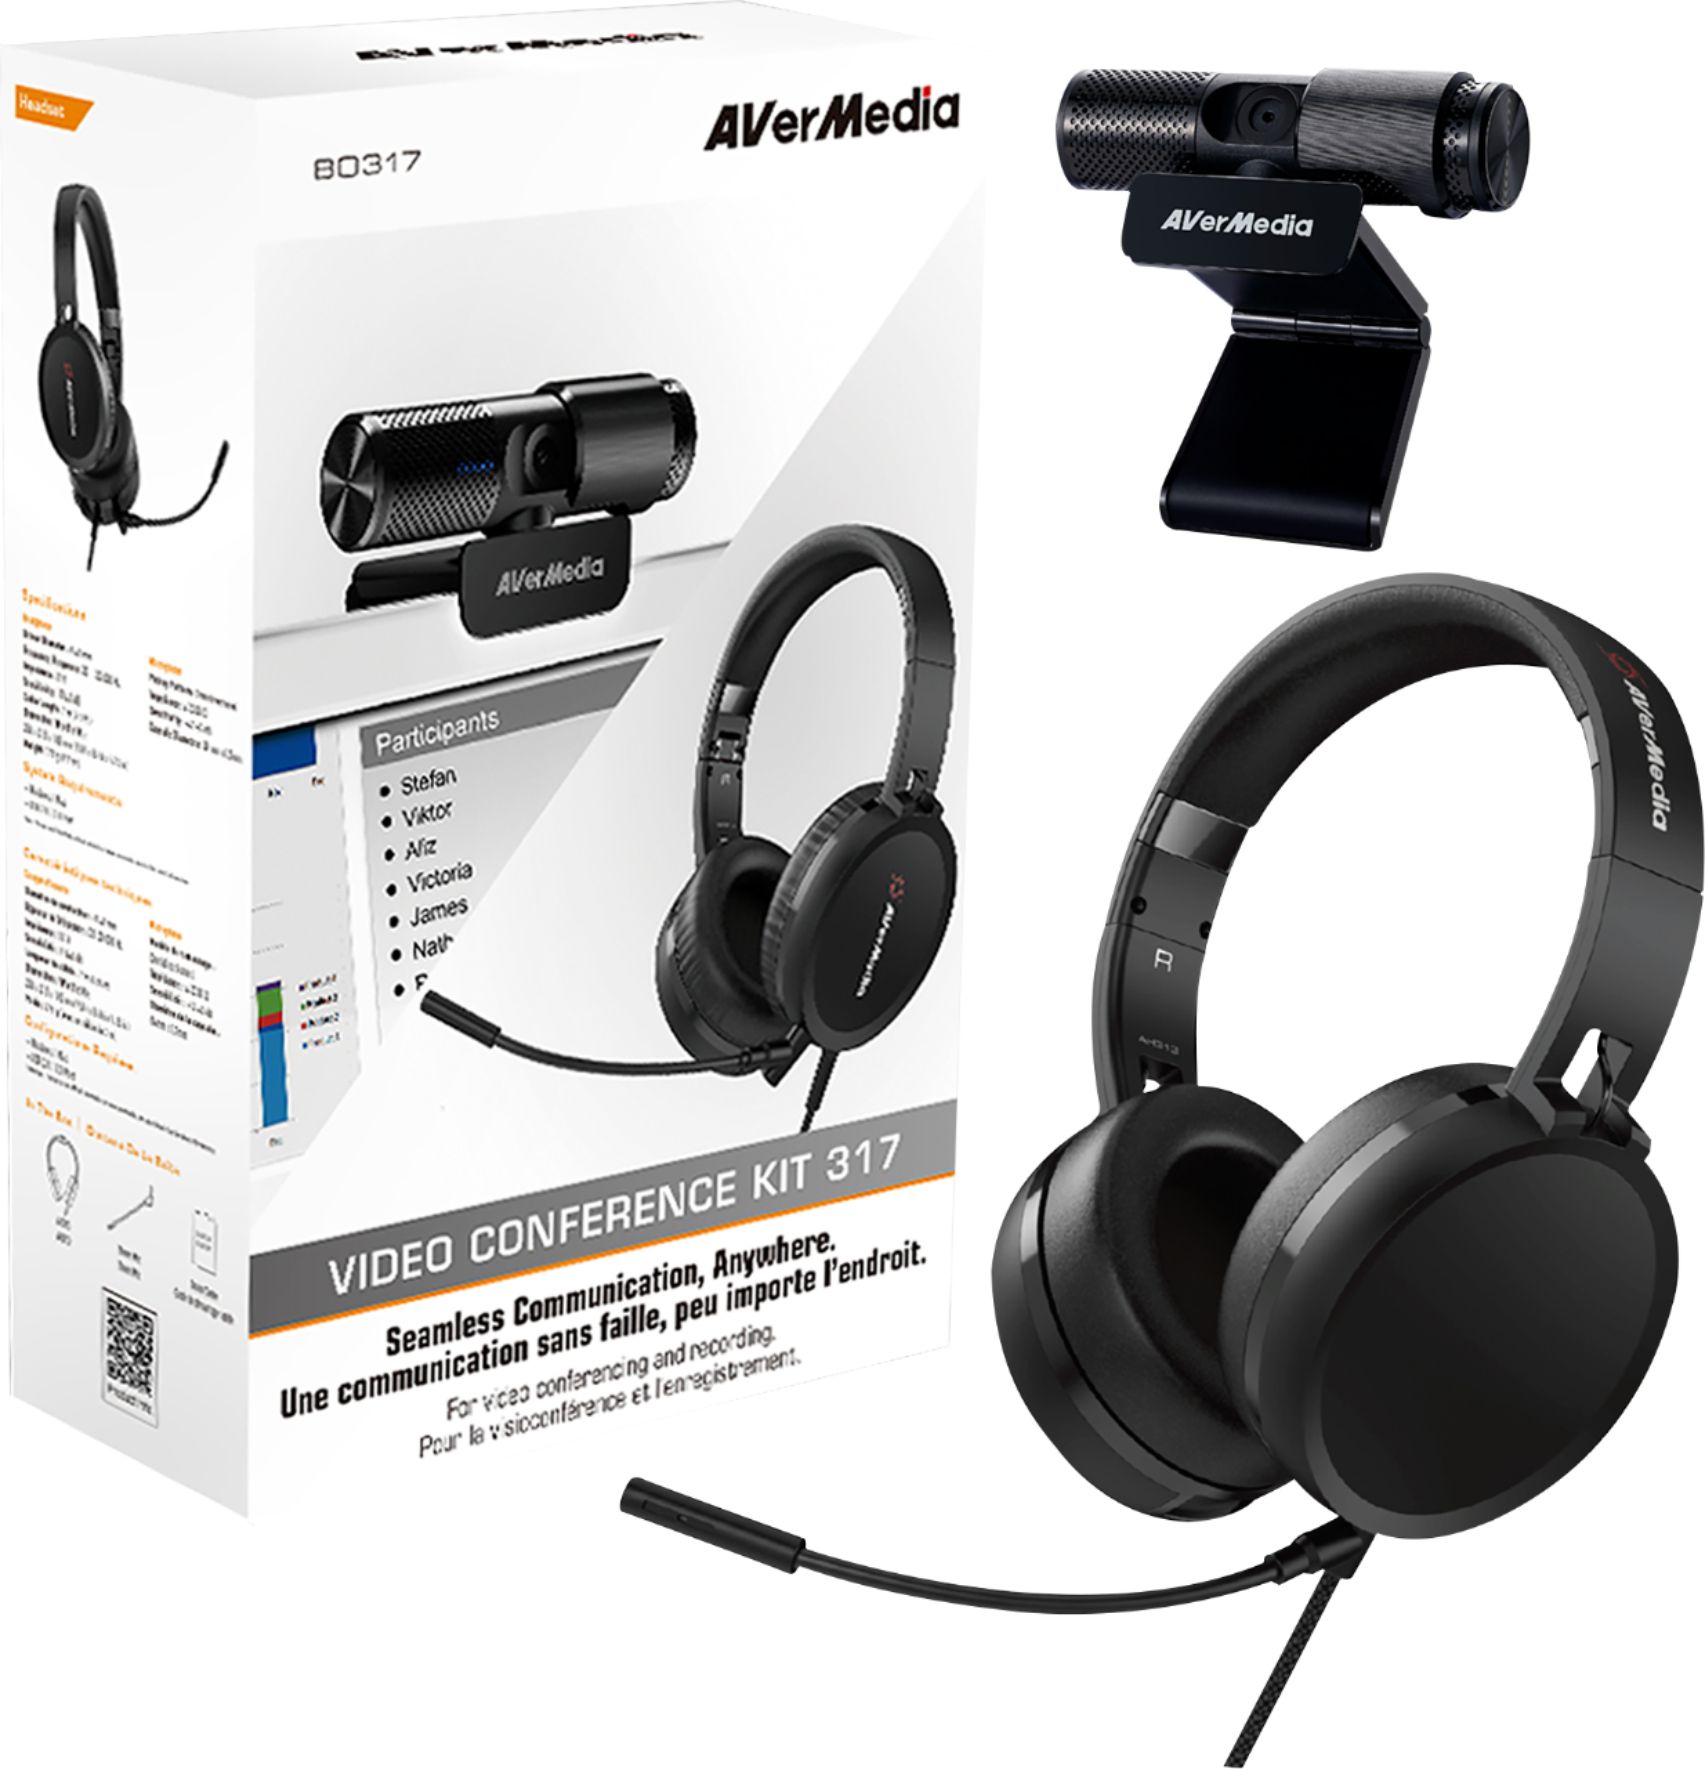 Angle View: AVerMedia - 317 Video Conferencing Kit 1080 with Full HD Webcam and High-Quality Over-Ear Headphones